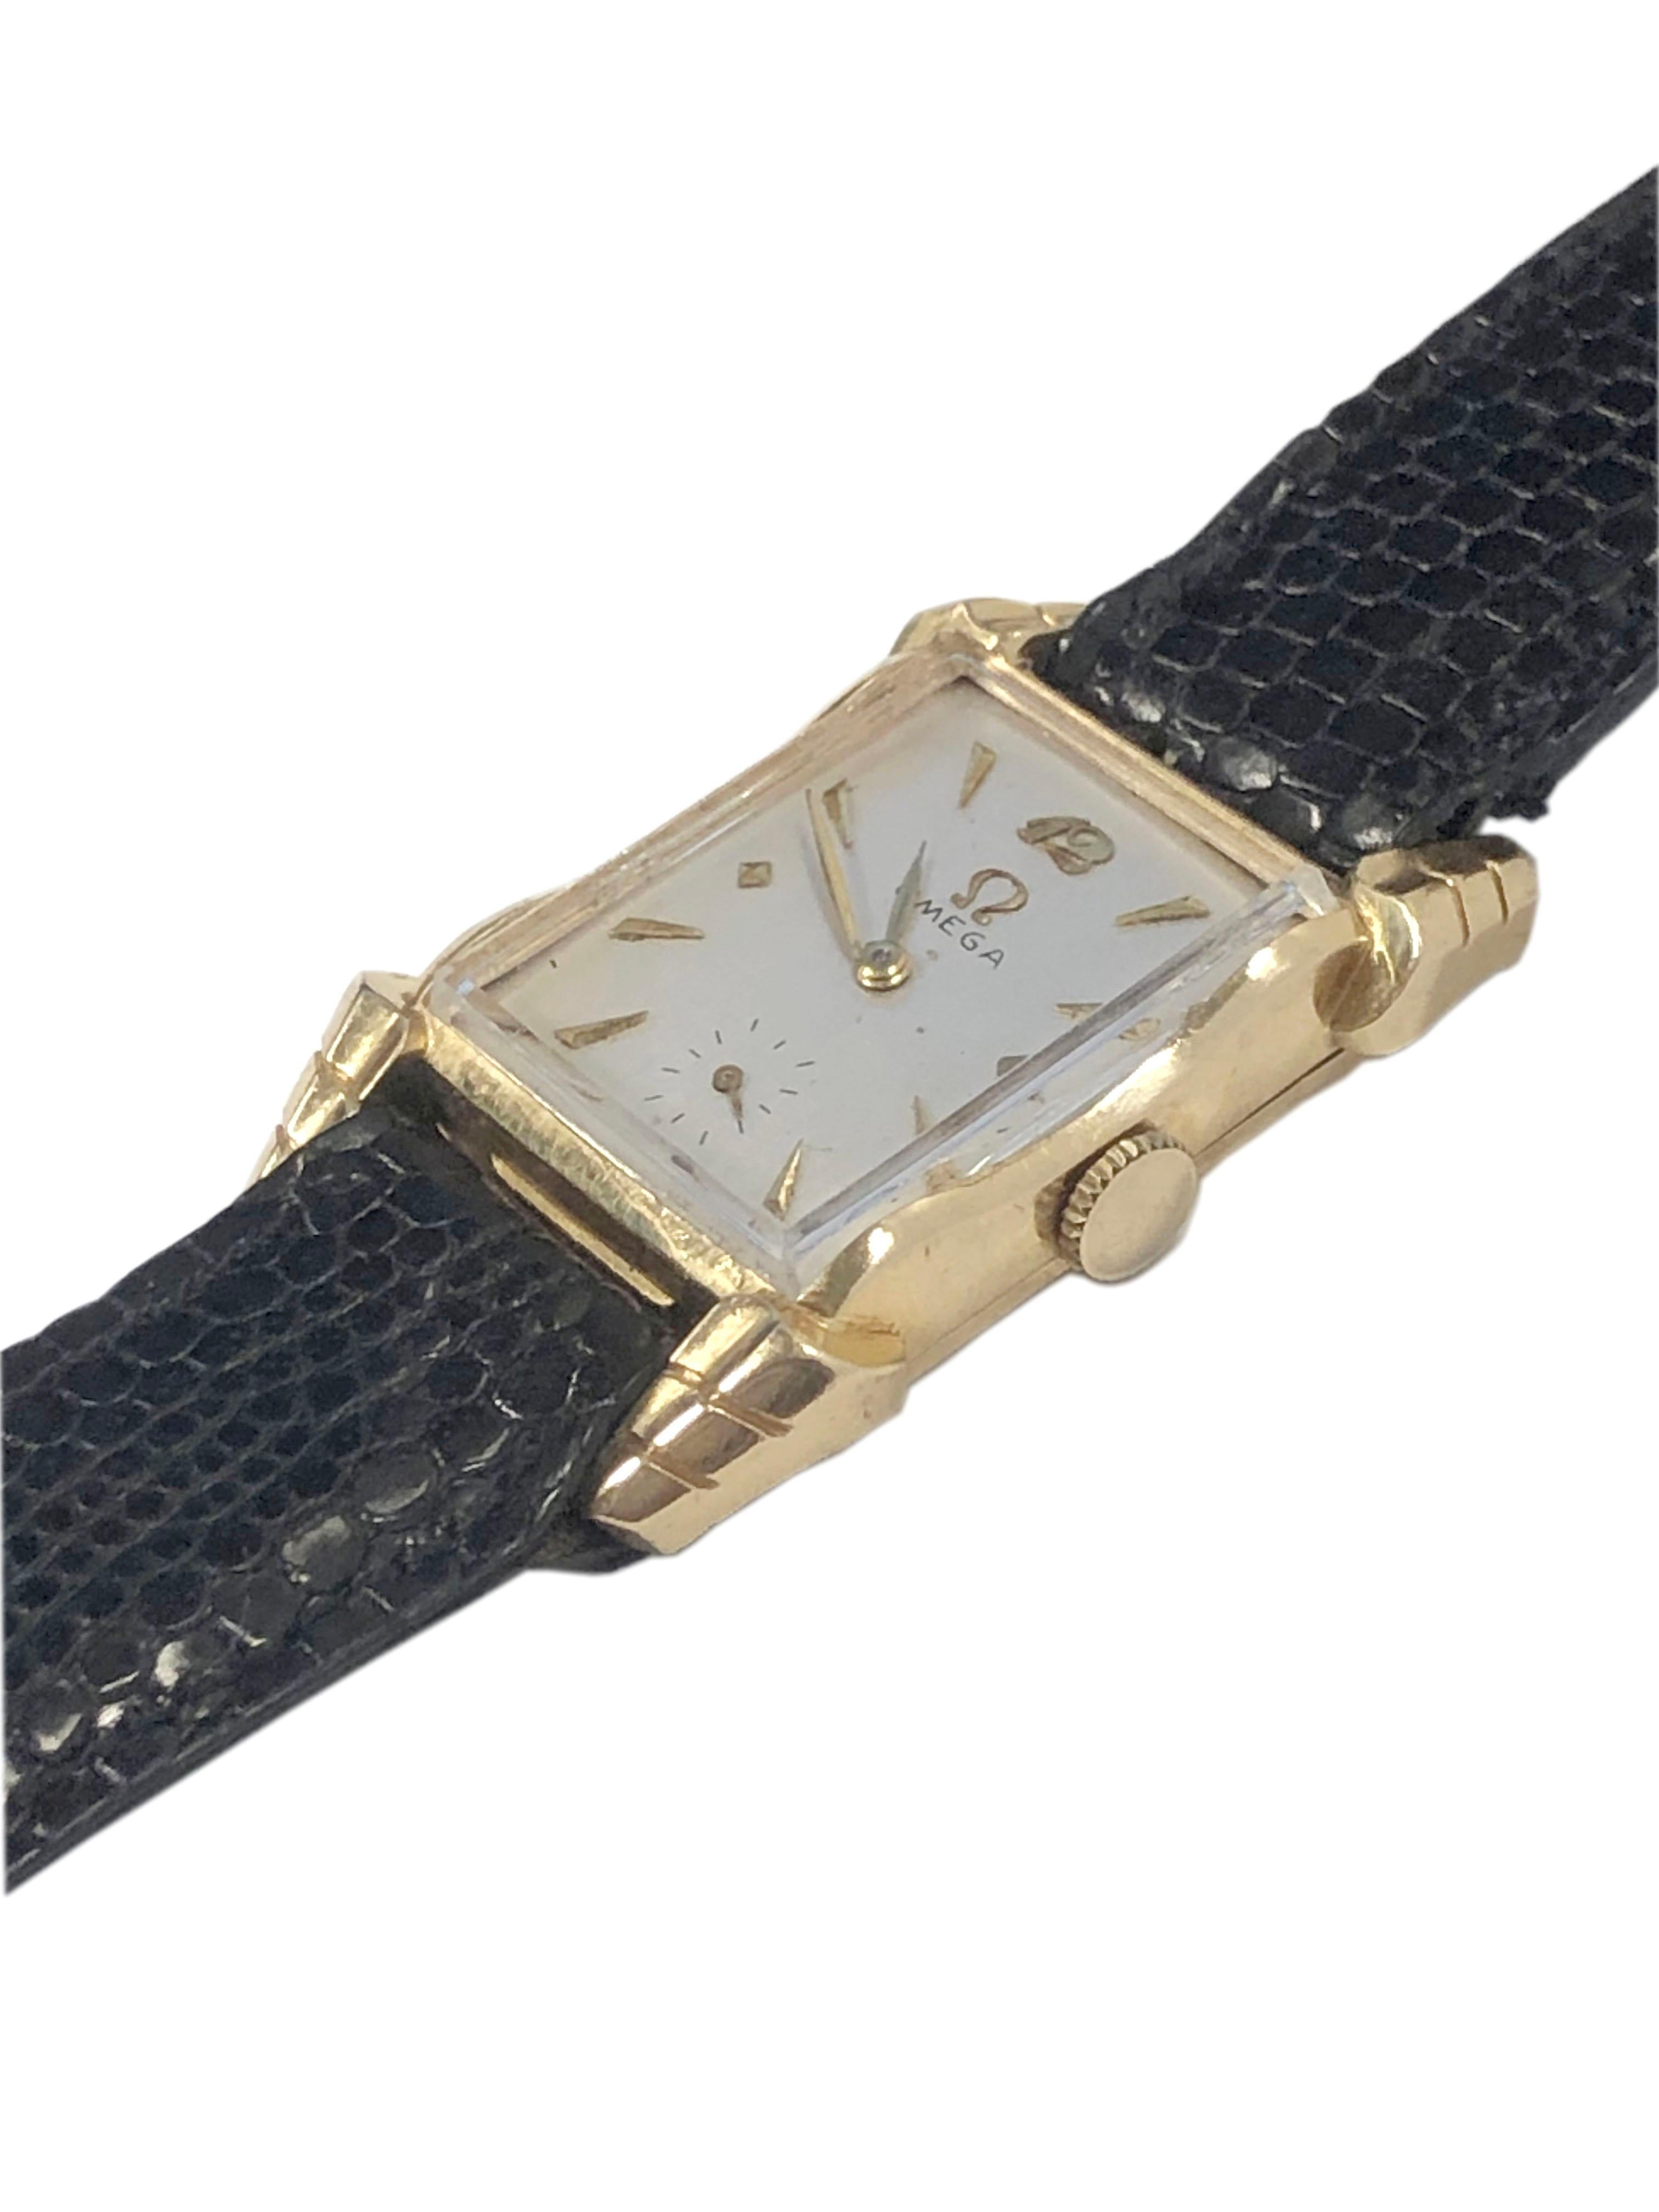 Circa 1940 Omega Wrist Watch, 39 X 21 M.M. 2 Piece 14k Yellow Gold Omega signed case with fancy flared Lugs. 17 Jewel Mechanical, Manual wind movement. Silver Satin dial with raised gold markers. Black Lizard Strap.